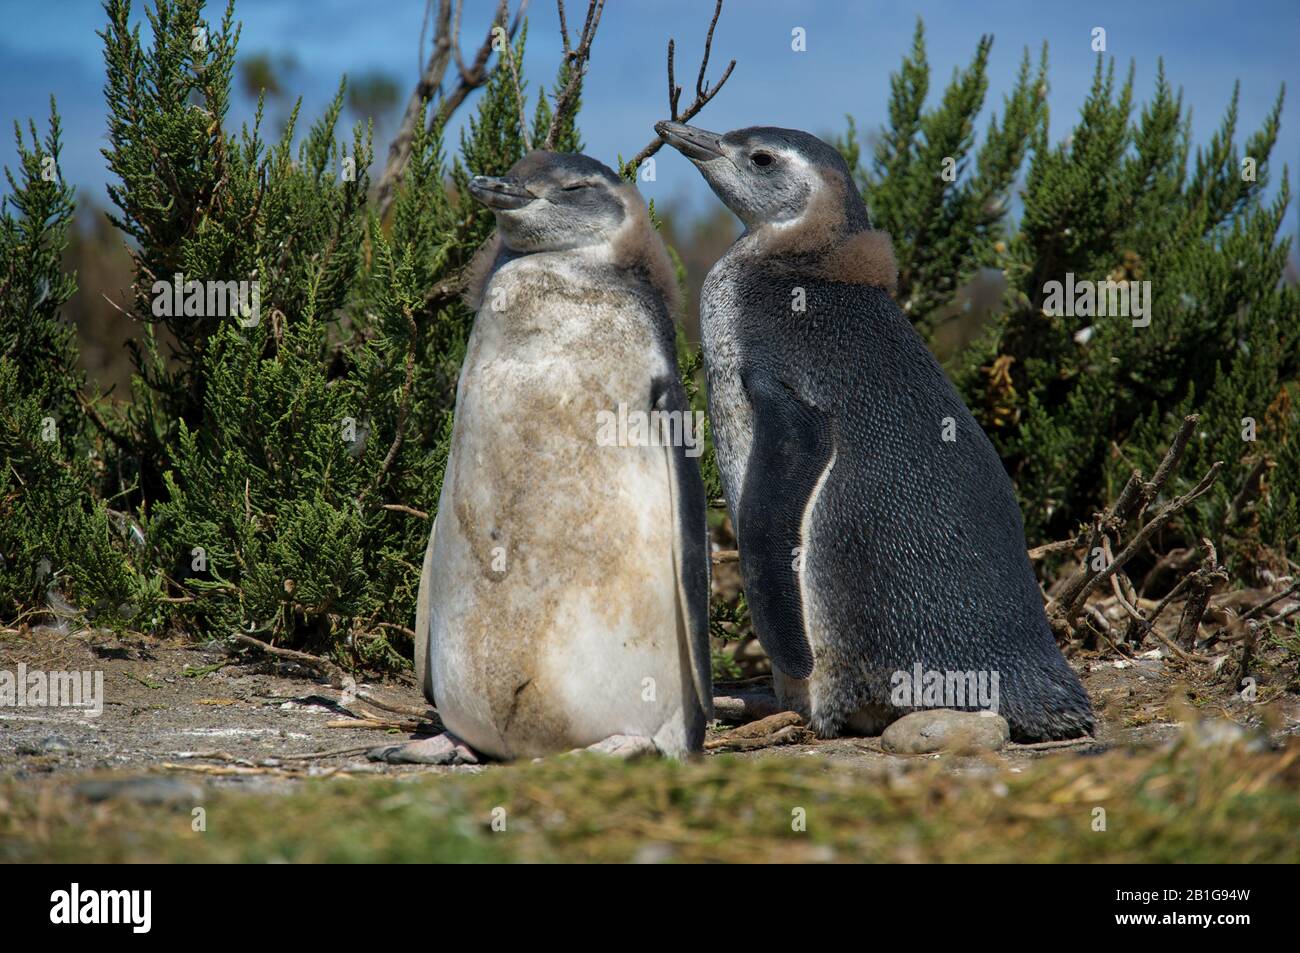 Magellanic penguin with Chicks or juveniles at Cabo Virgenes during breeding season Stock Photo